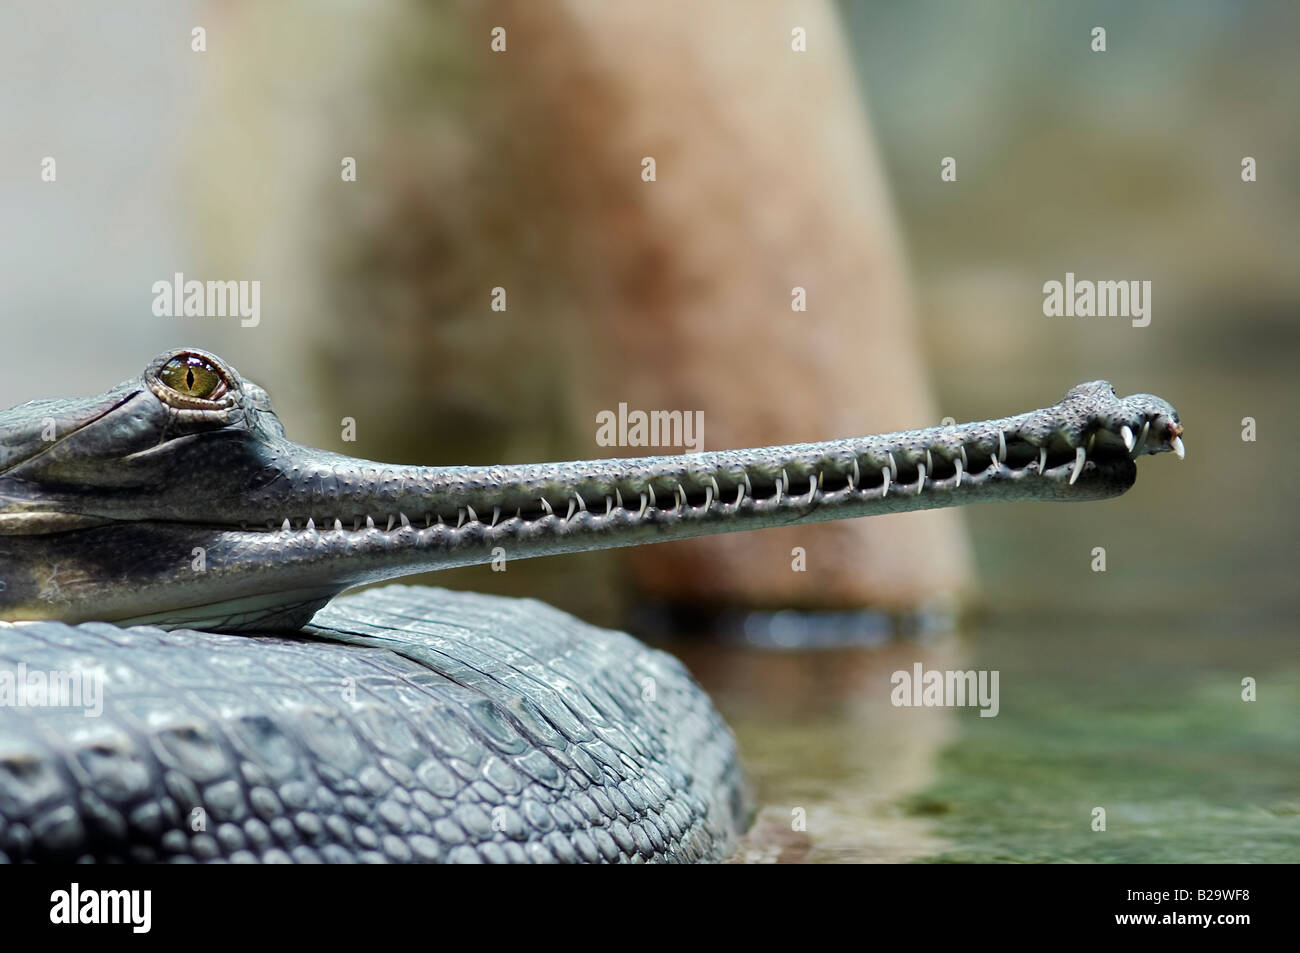 Detail of the head of Indial gavial - endangered species Stock Photo